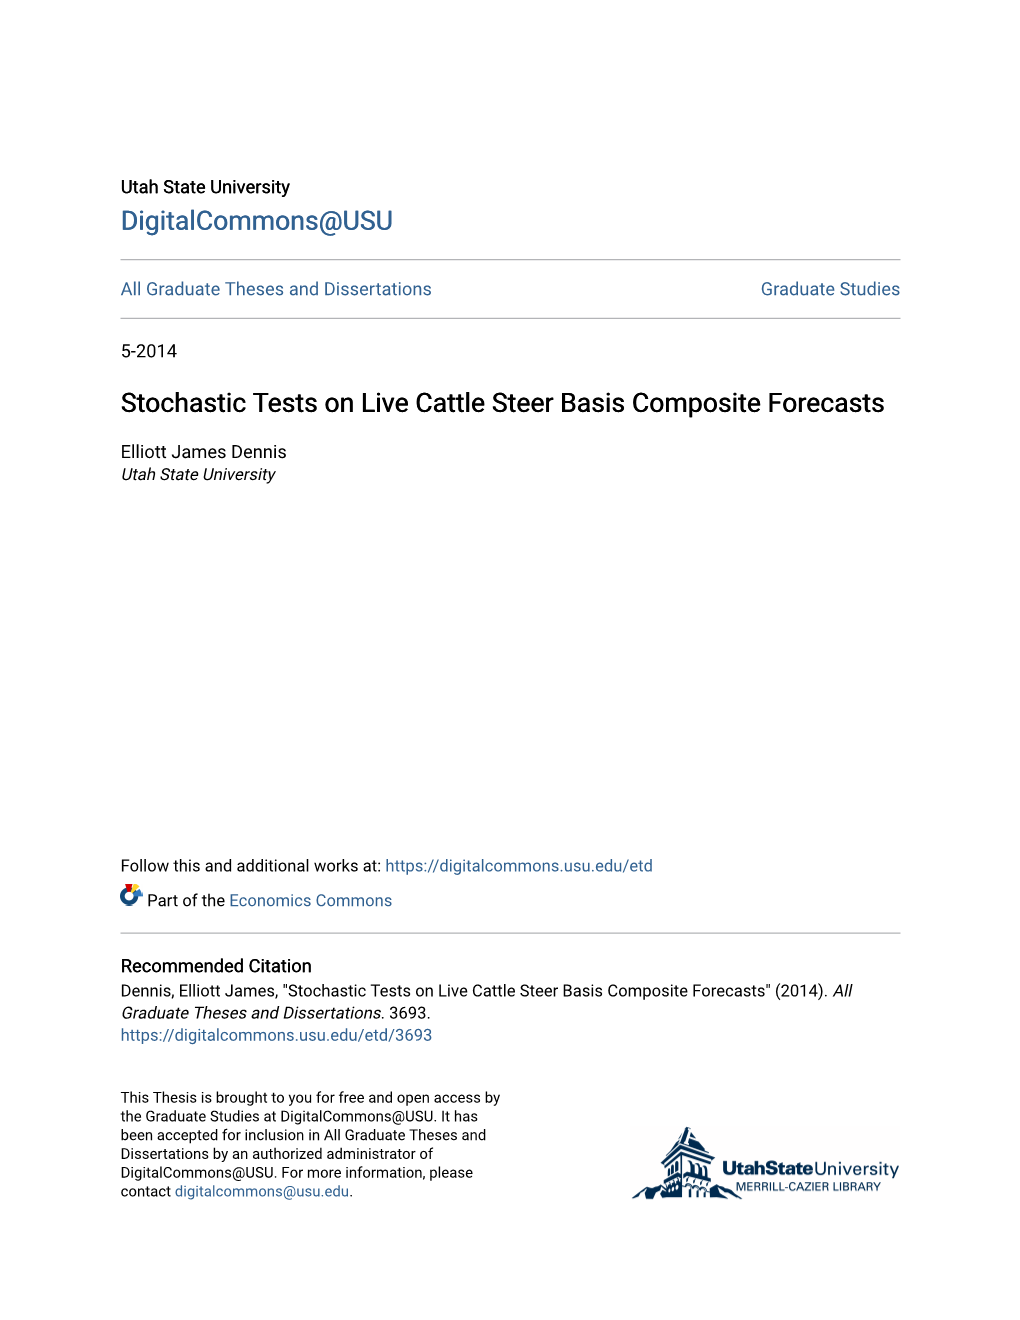 Stochastic Tests on Live Cattle Steer Basis Composite Forecasts